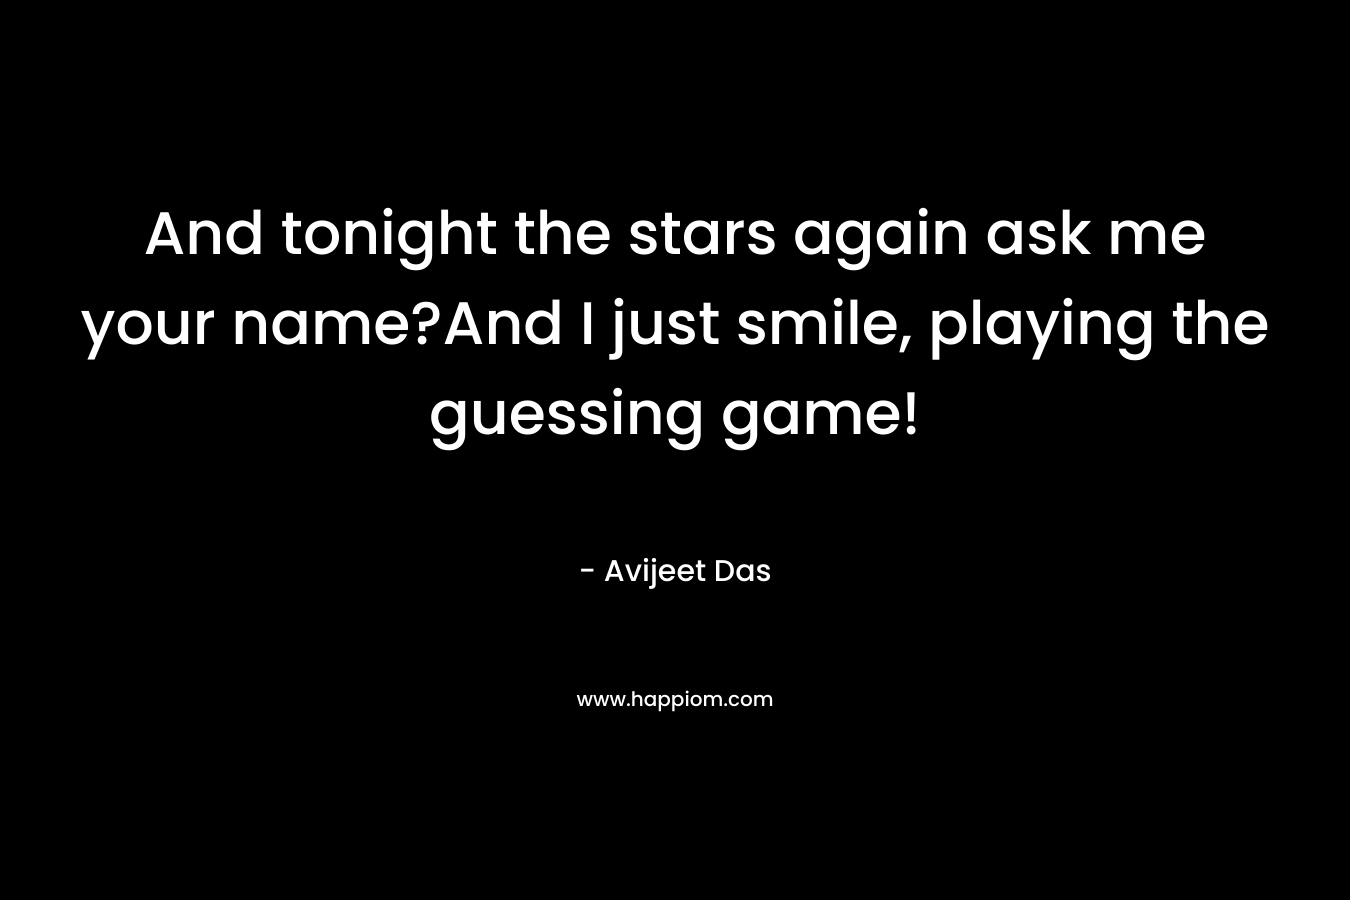 And tonight the stars again ask me your name?And I just smile, playing the guessing game!